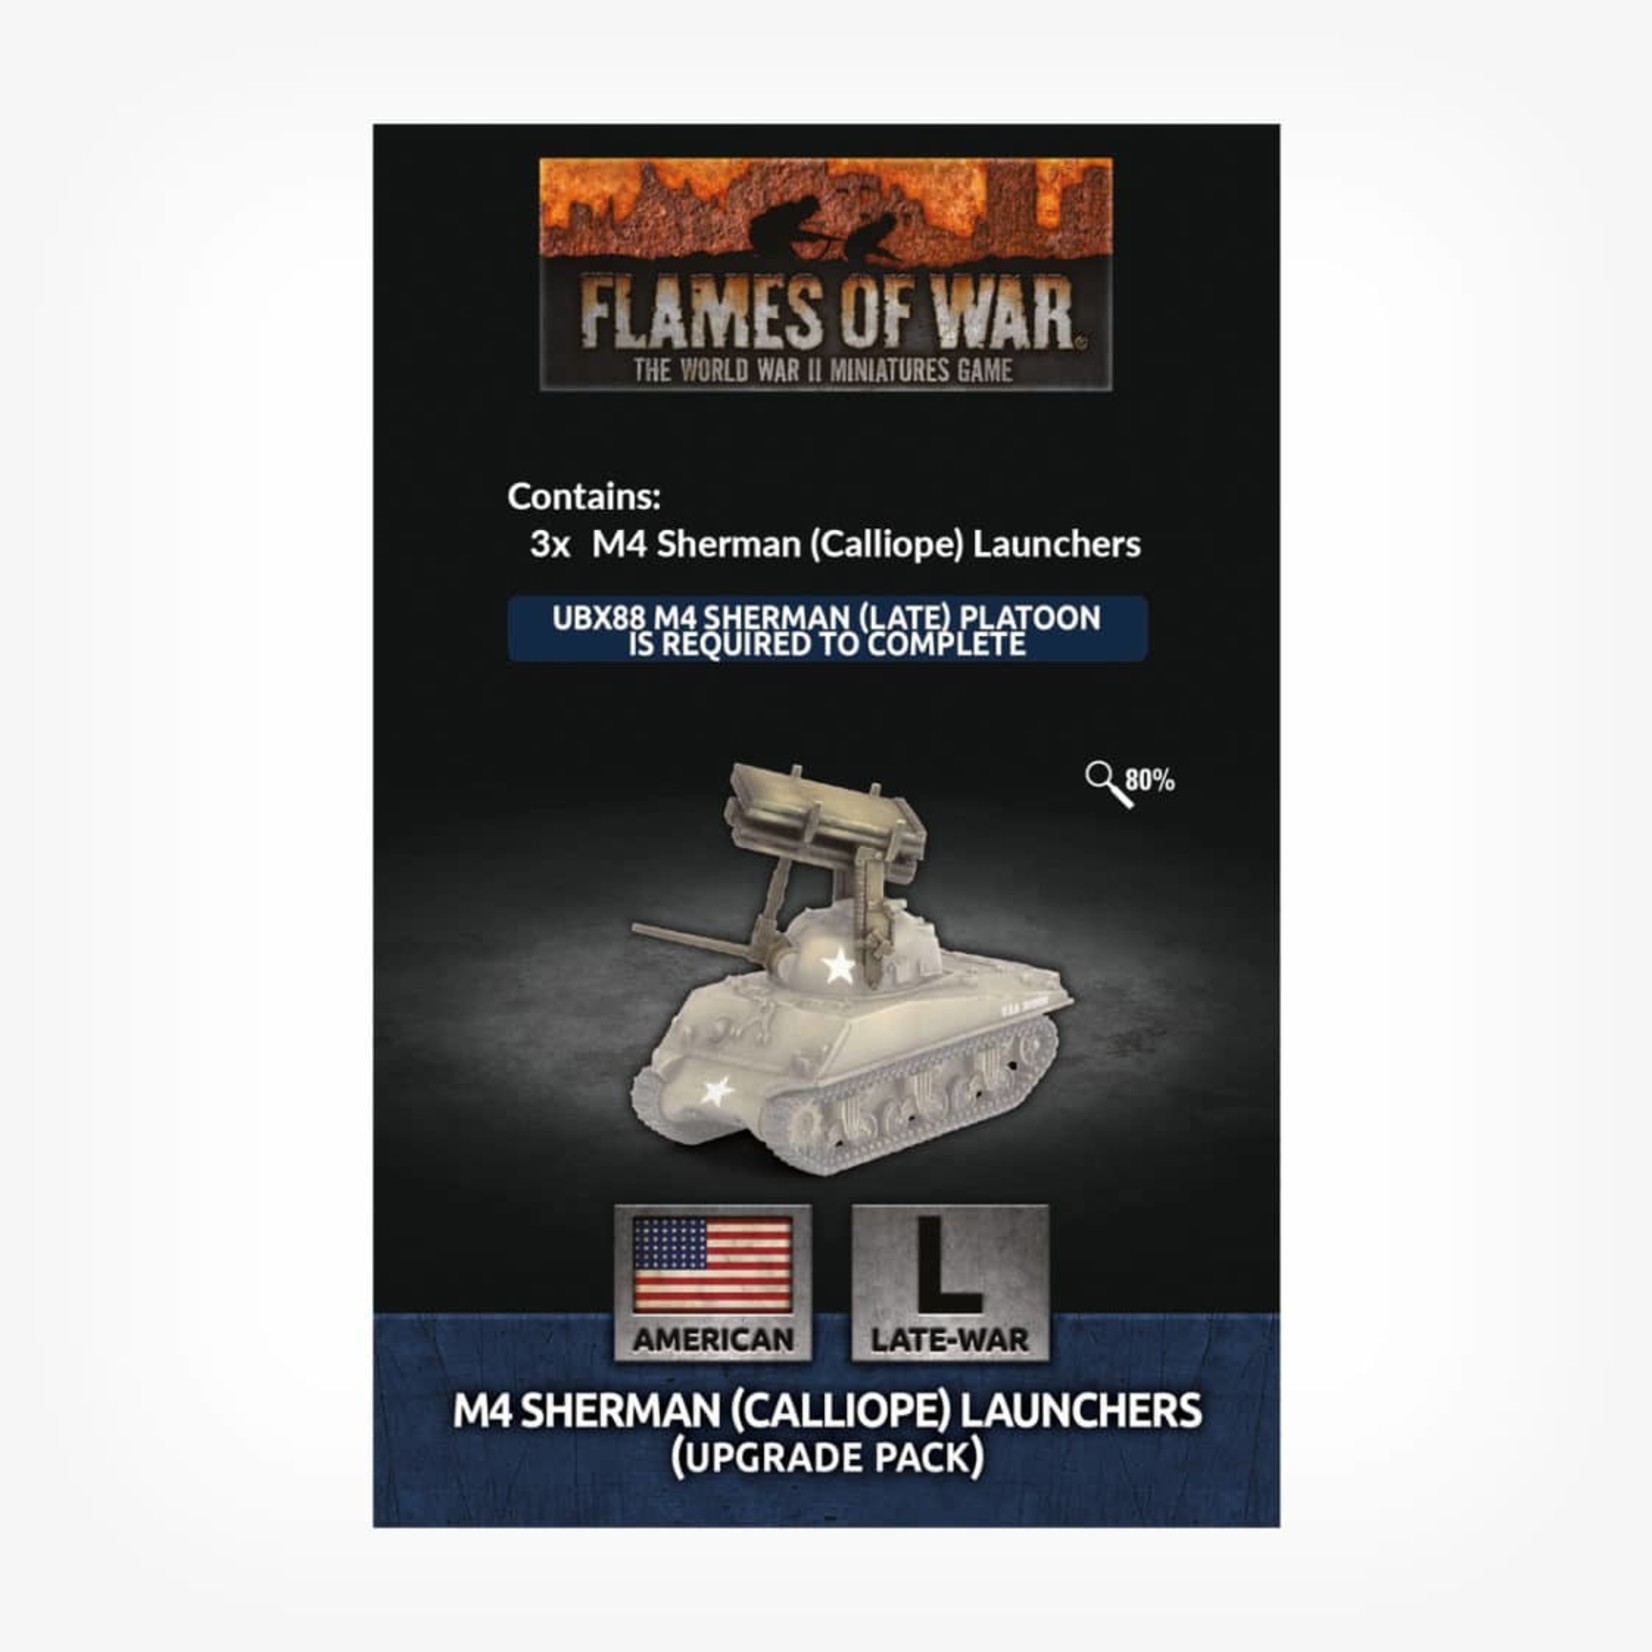 Flames of War Flames of War: American M4 Sherman (Calliope) Launchers (Upgrade Pack)